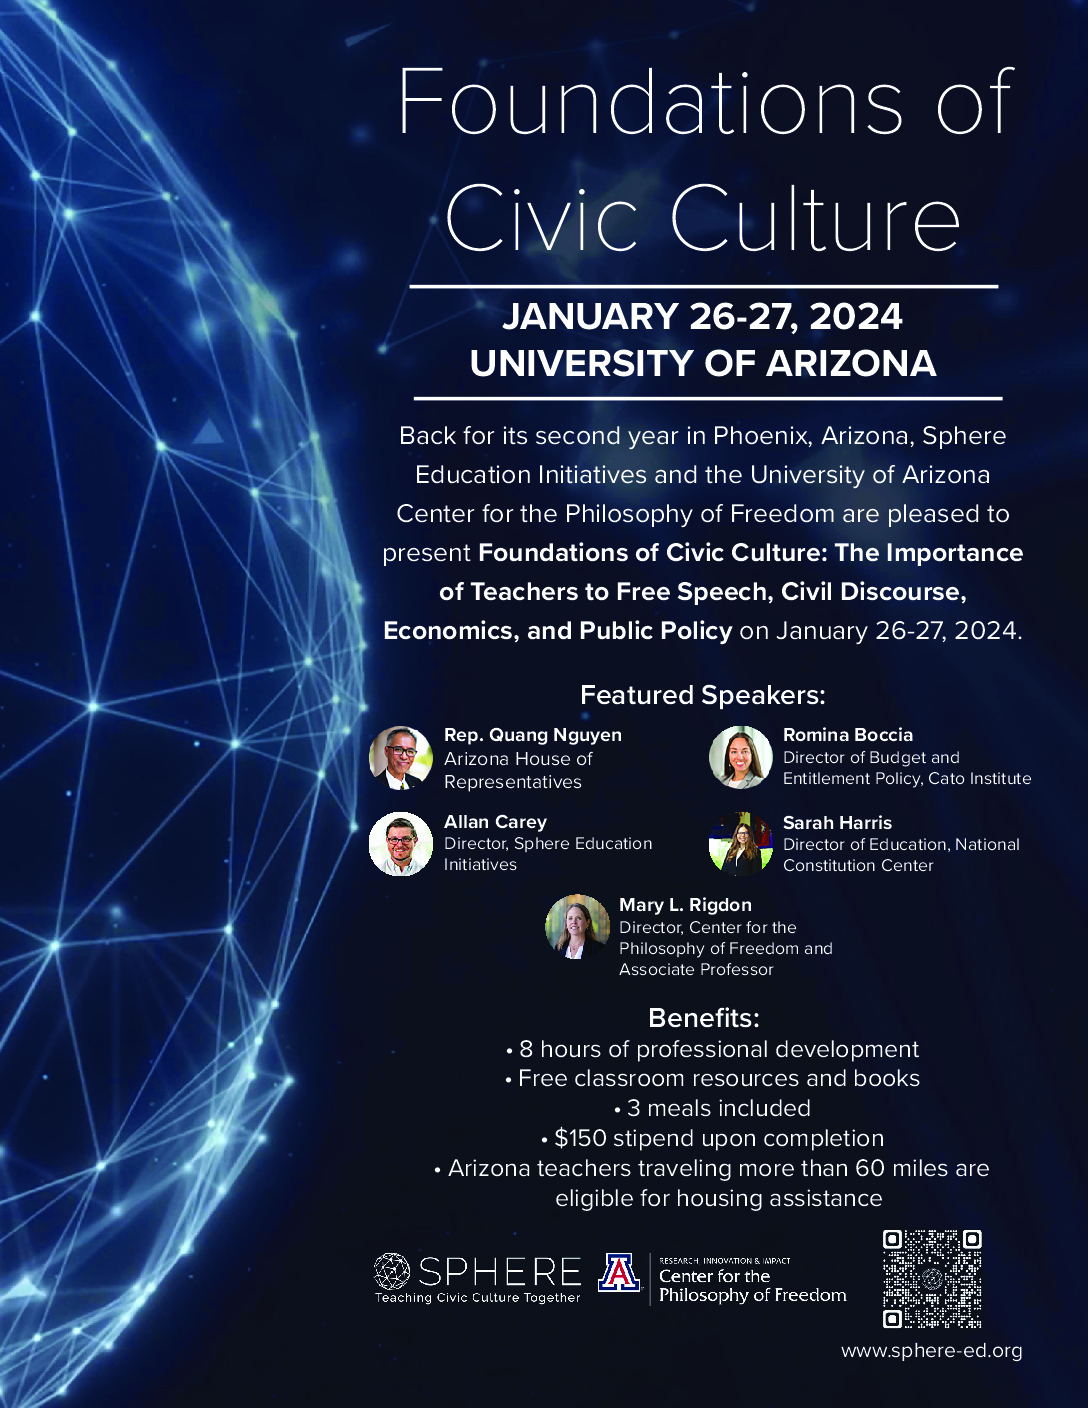 Flyer with information about the Foundations of Civic Culture event including the date, location, and featured speakers.